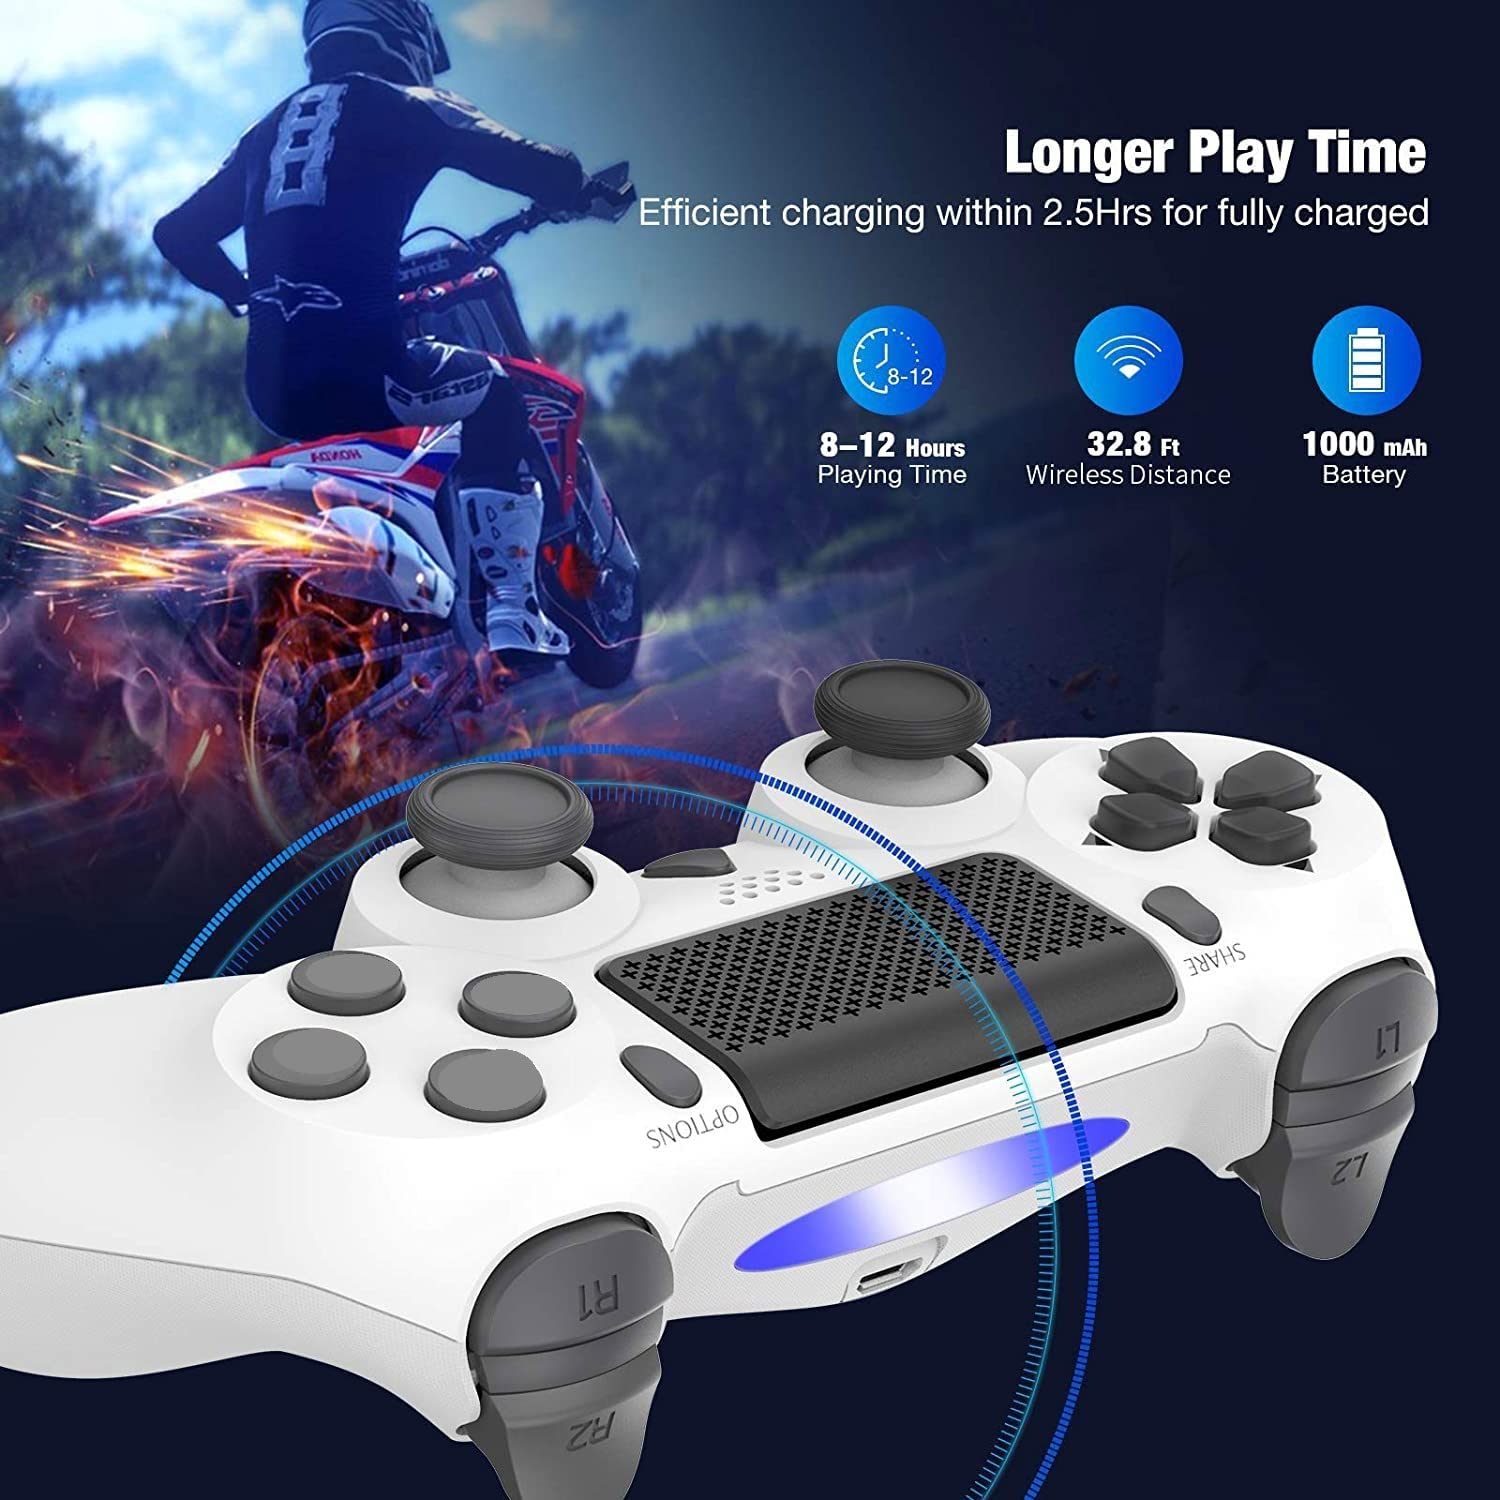 Rzzhgzq 2 Pack Wireless Controller for PS-4 Compatible with P4 /Pro/Slim Console with Charging Cable Wireless Joystick Gift for Kids,Son,Man(WHITE+CAMOUFLAGE)